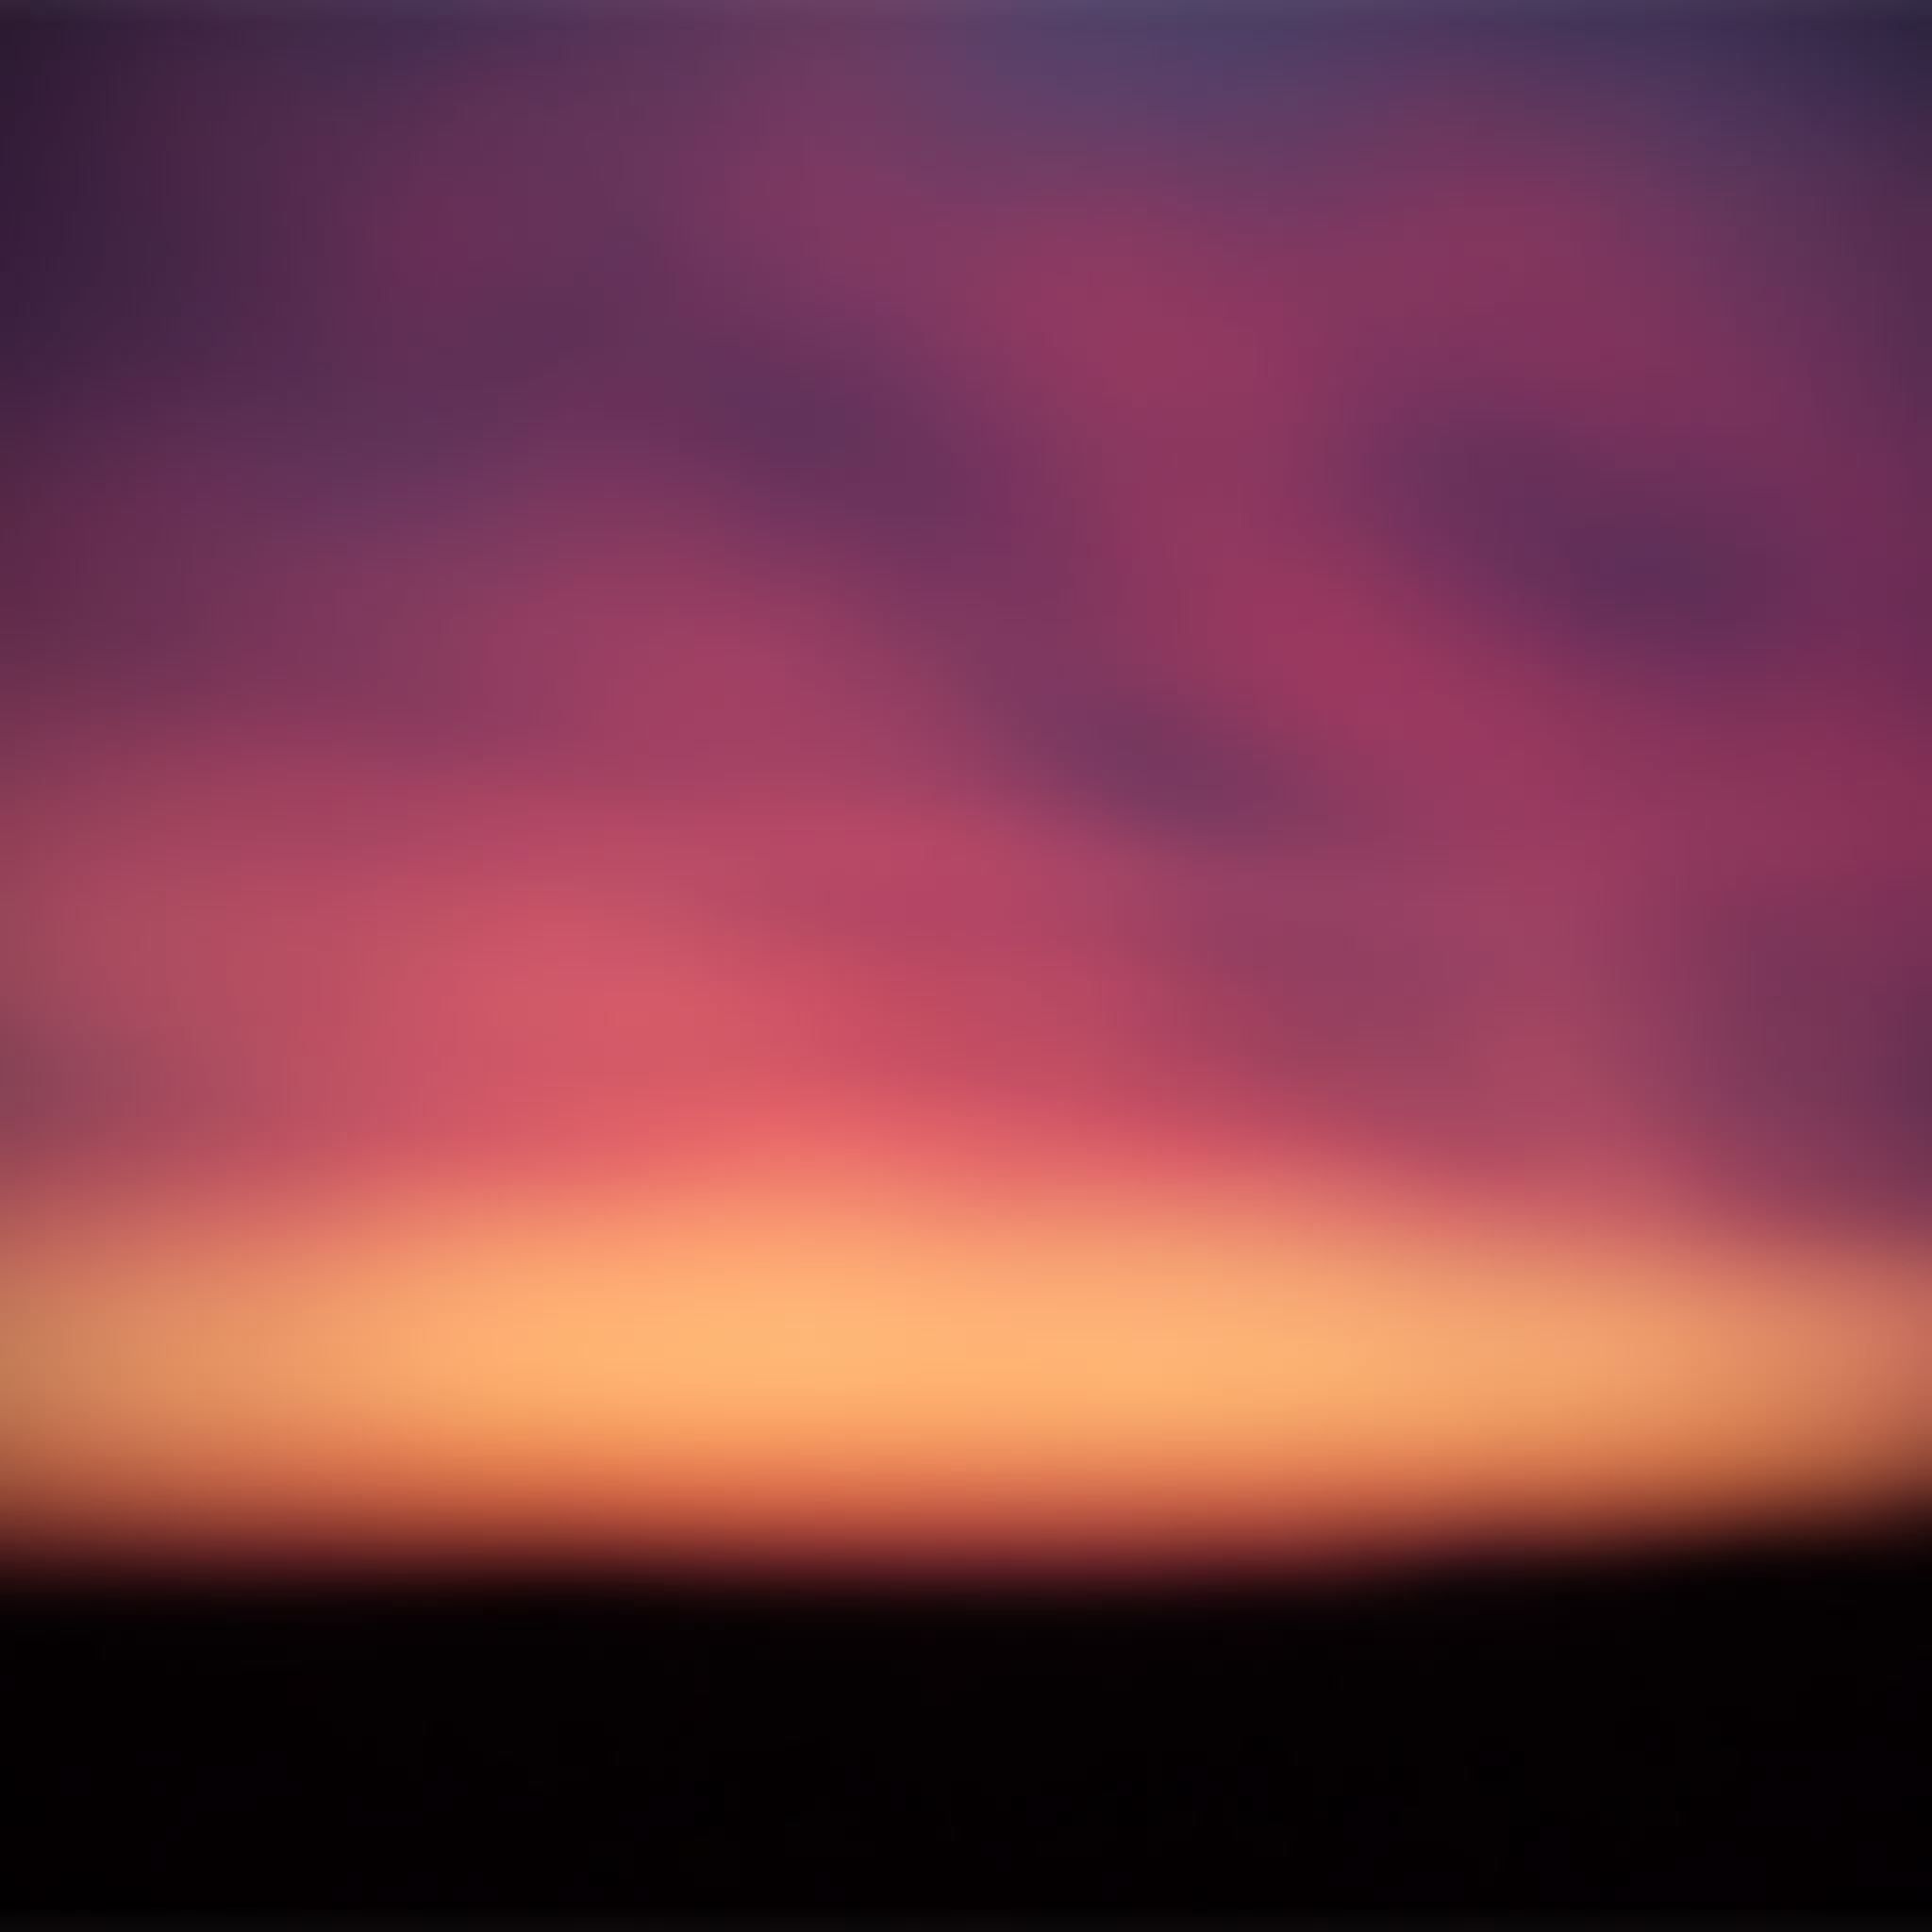 A sunset with a purple, orange, and pink gradient - Blurry